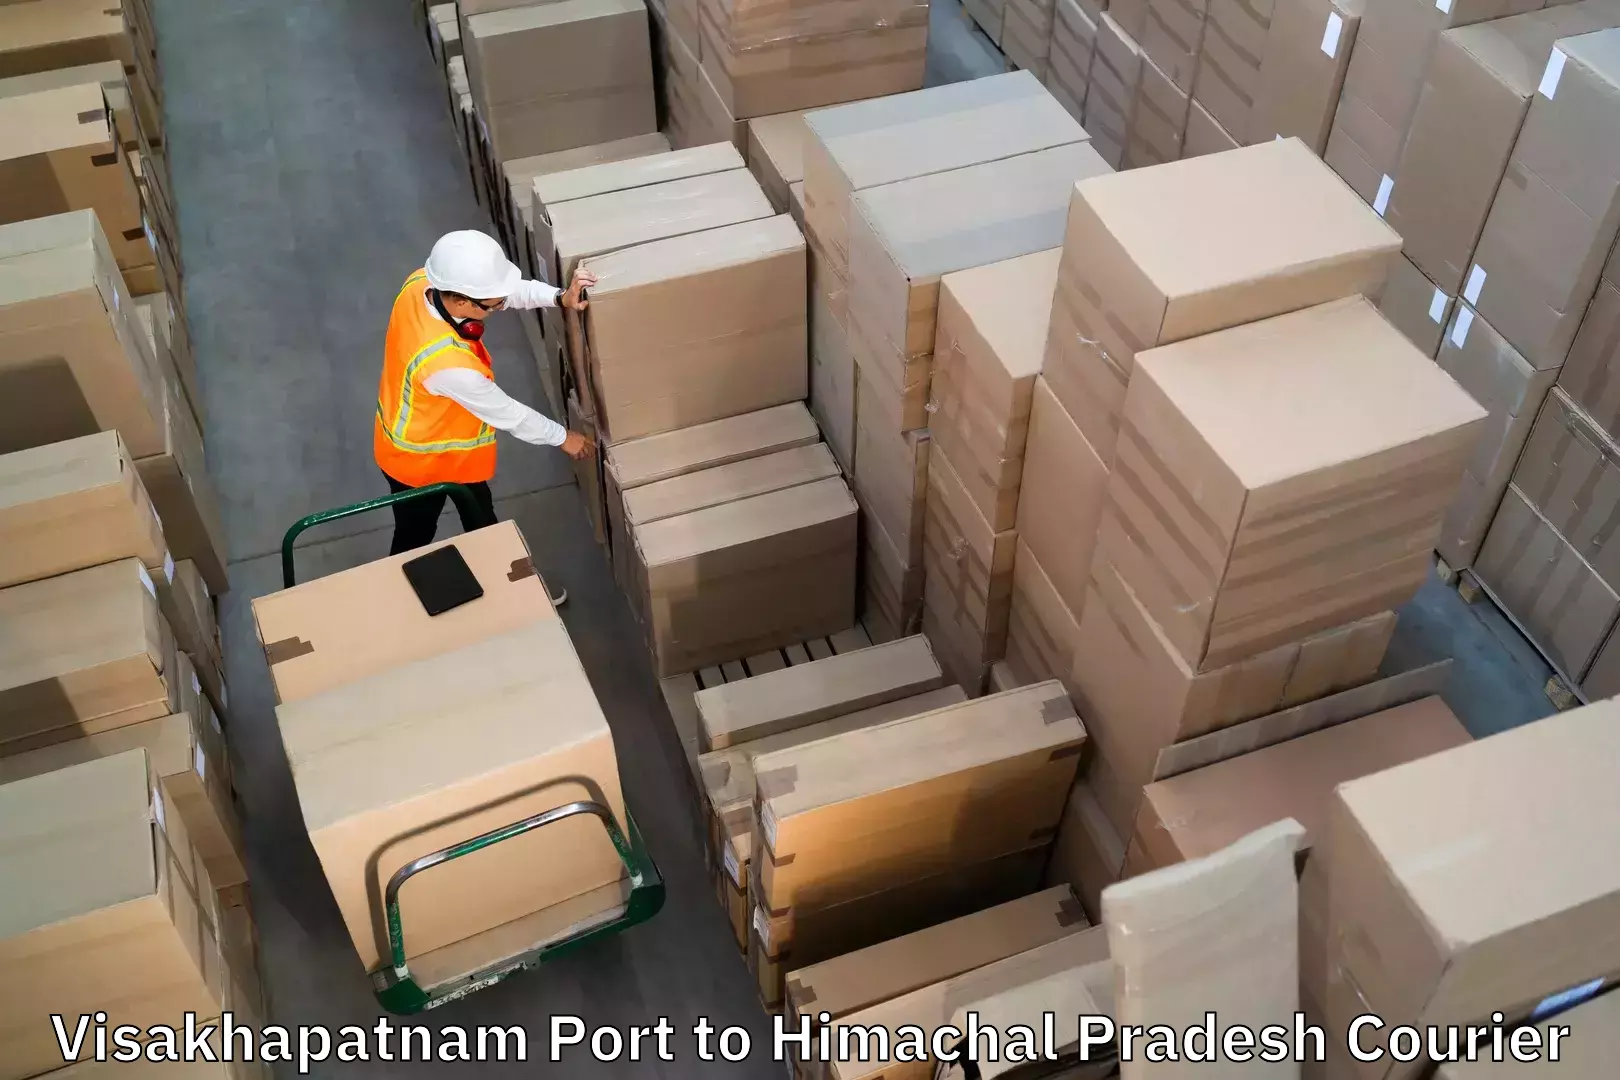 Luggage delivery providers Visakhapatnam Port to Baijnath